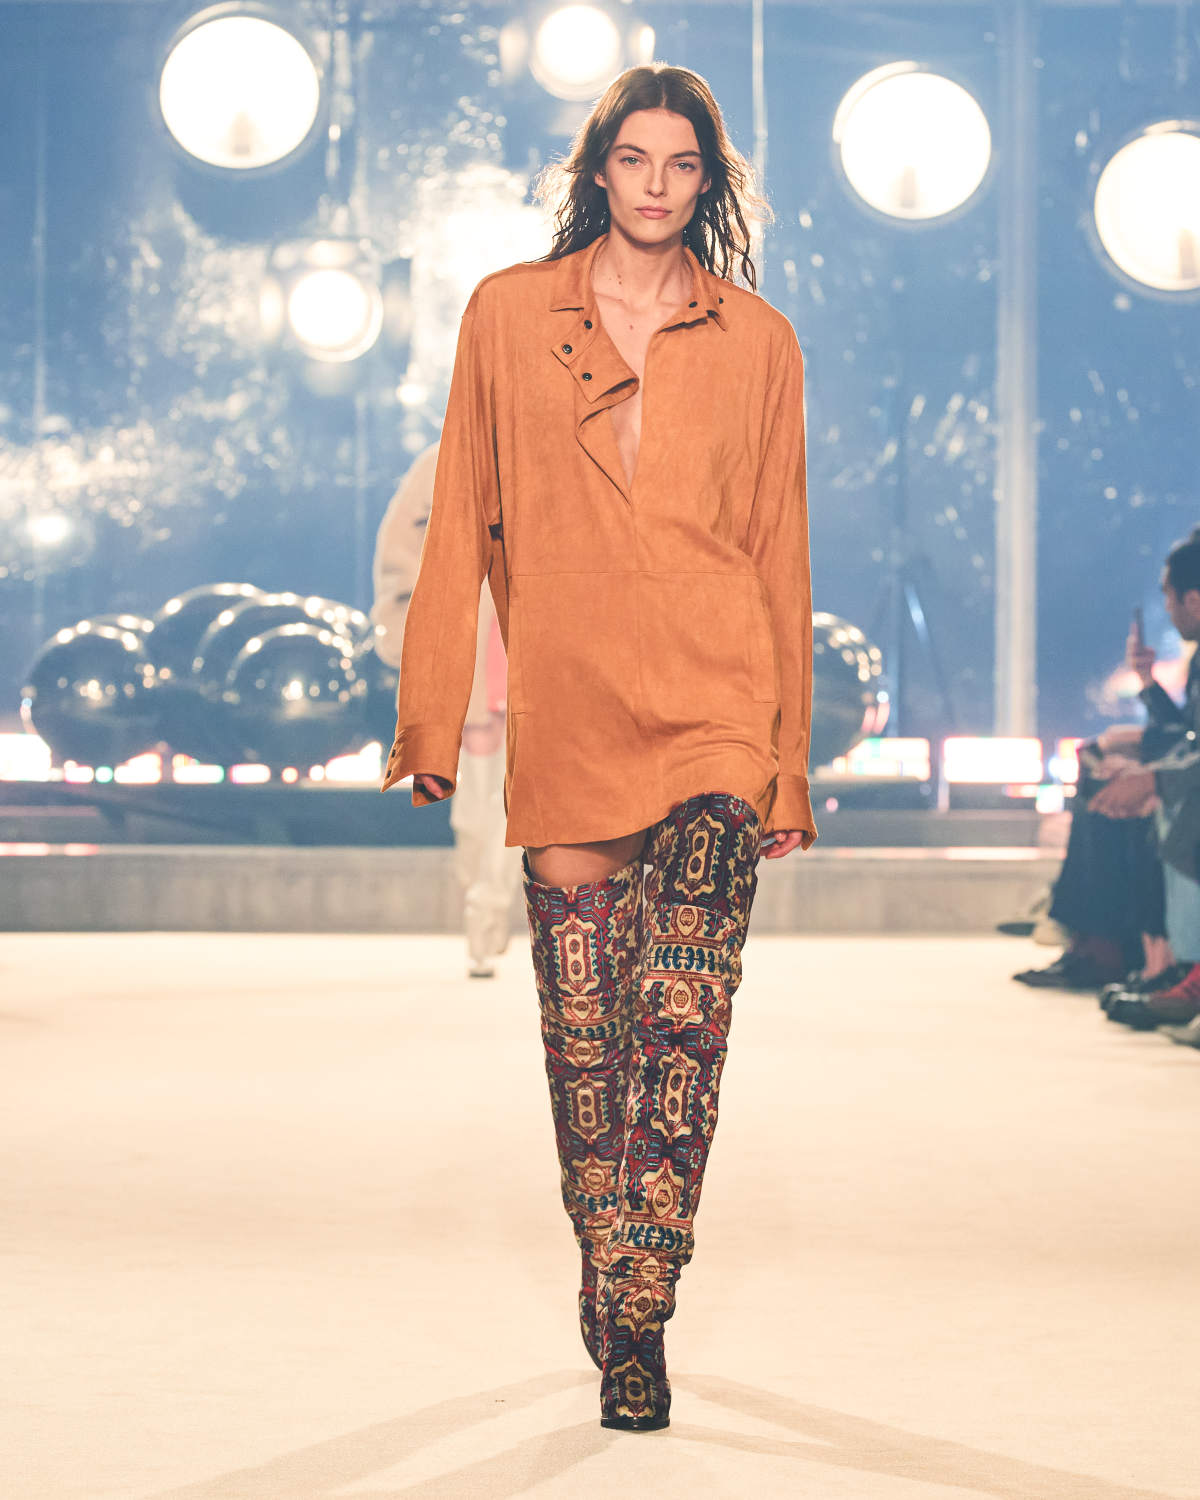 Isabel Marant Presents Her New Fall-Winter 2022 Collection